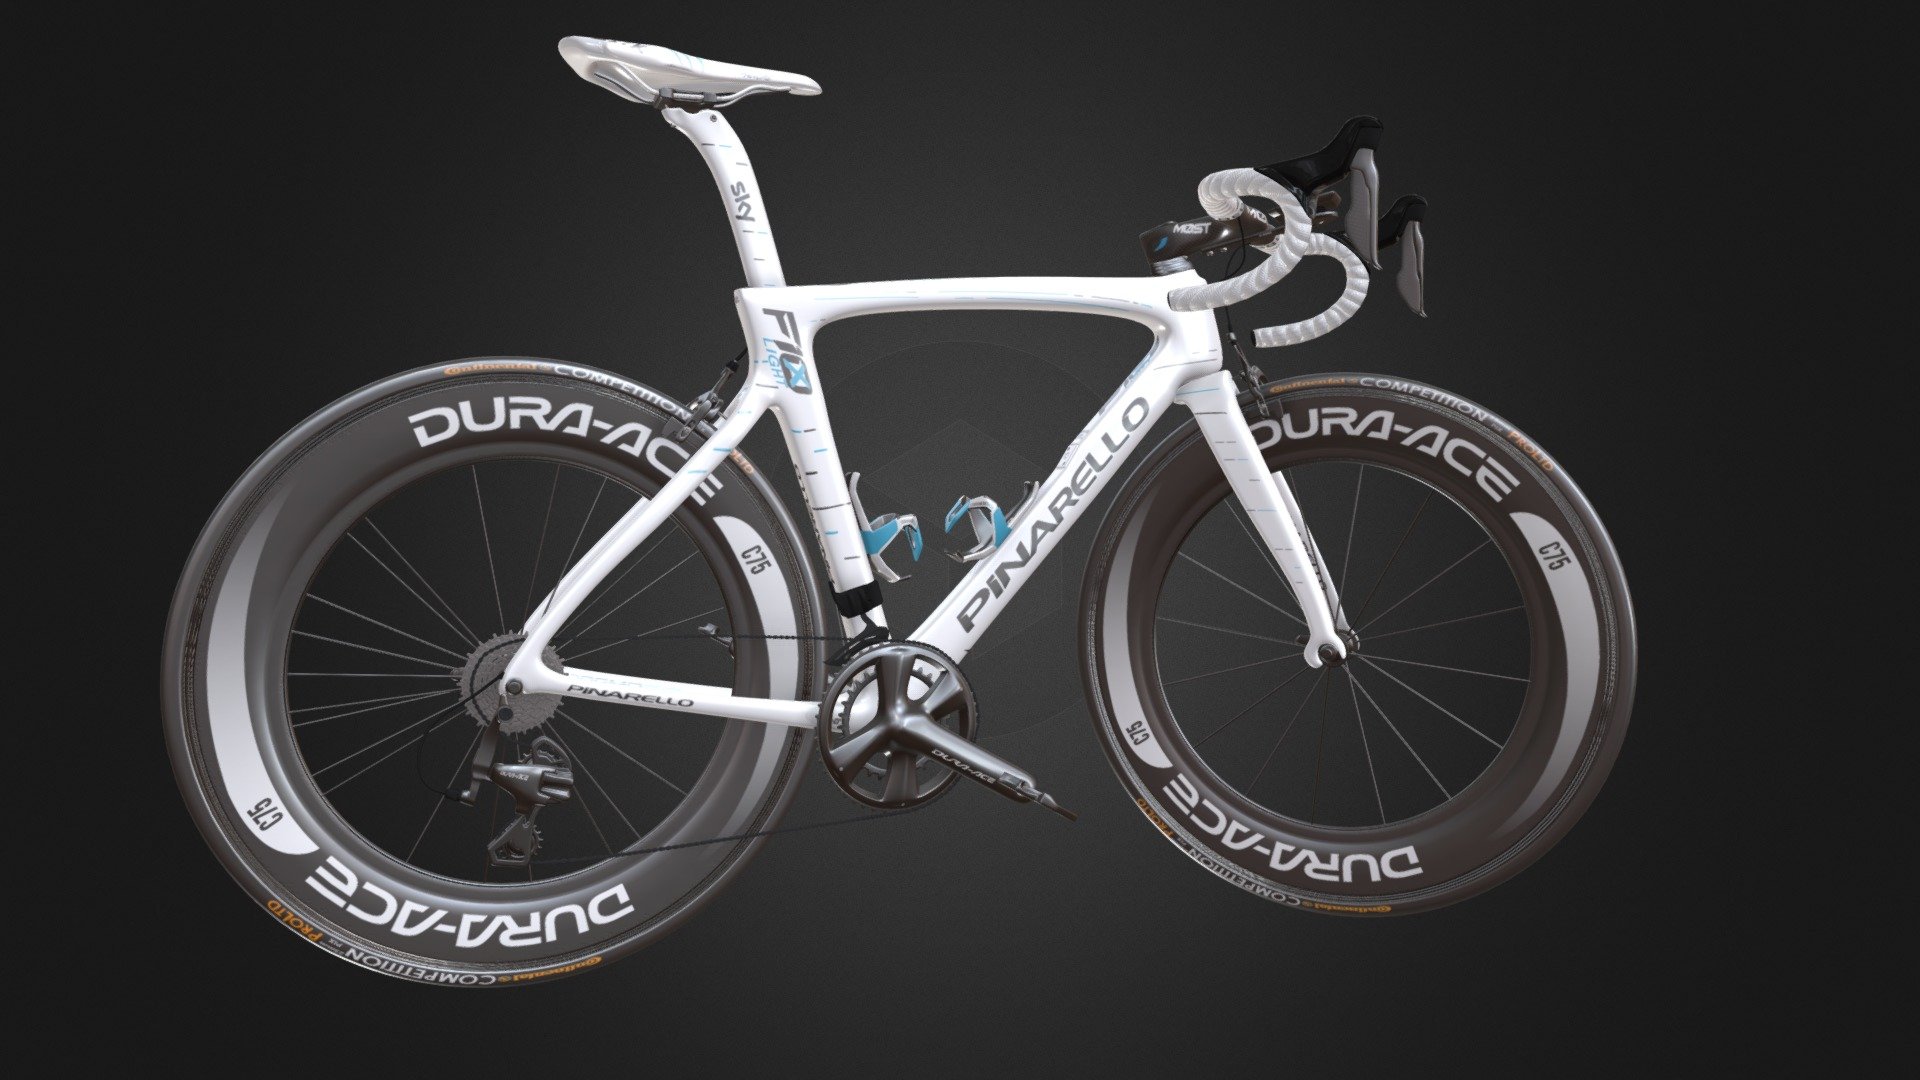 Pinarello Dogma F10  X-Light roadbike 3d model made in 3ds max 2016. 
Textured, animated drive and the handlebar.
All objects are grouped or named accordingly.
Turbosmooth/open smoothing lvl 2 = 614692 polys and 416635 verts 3d model